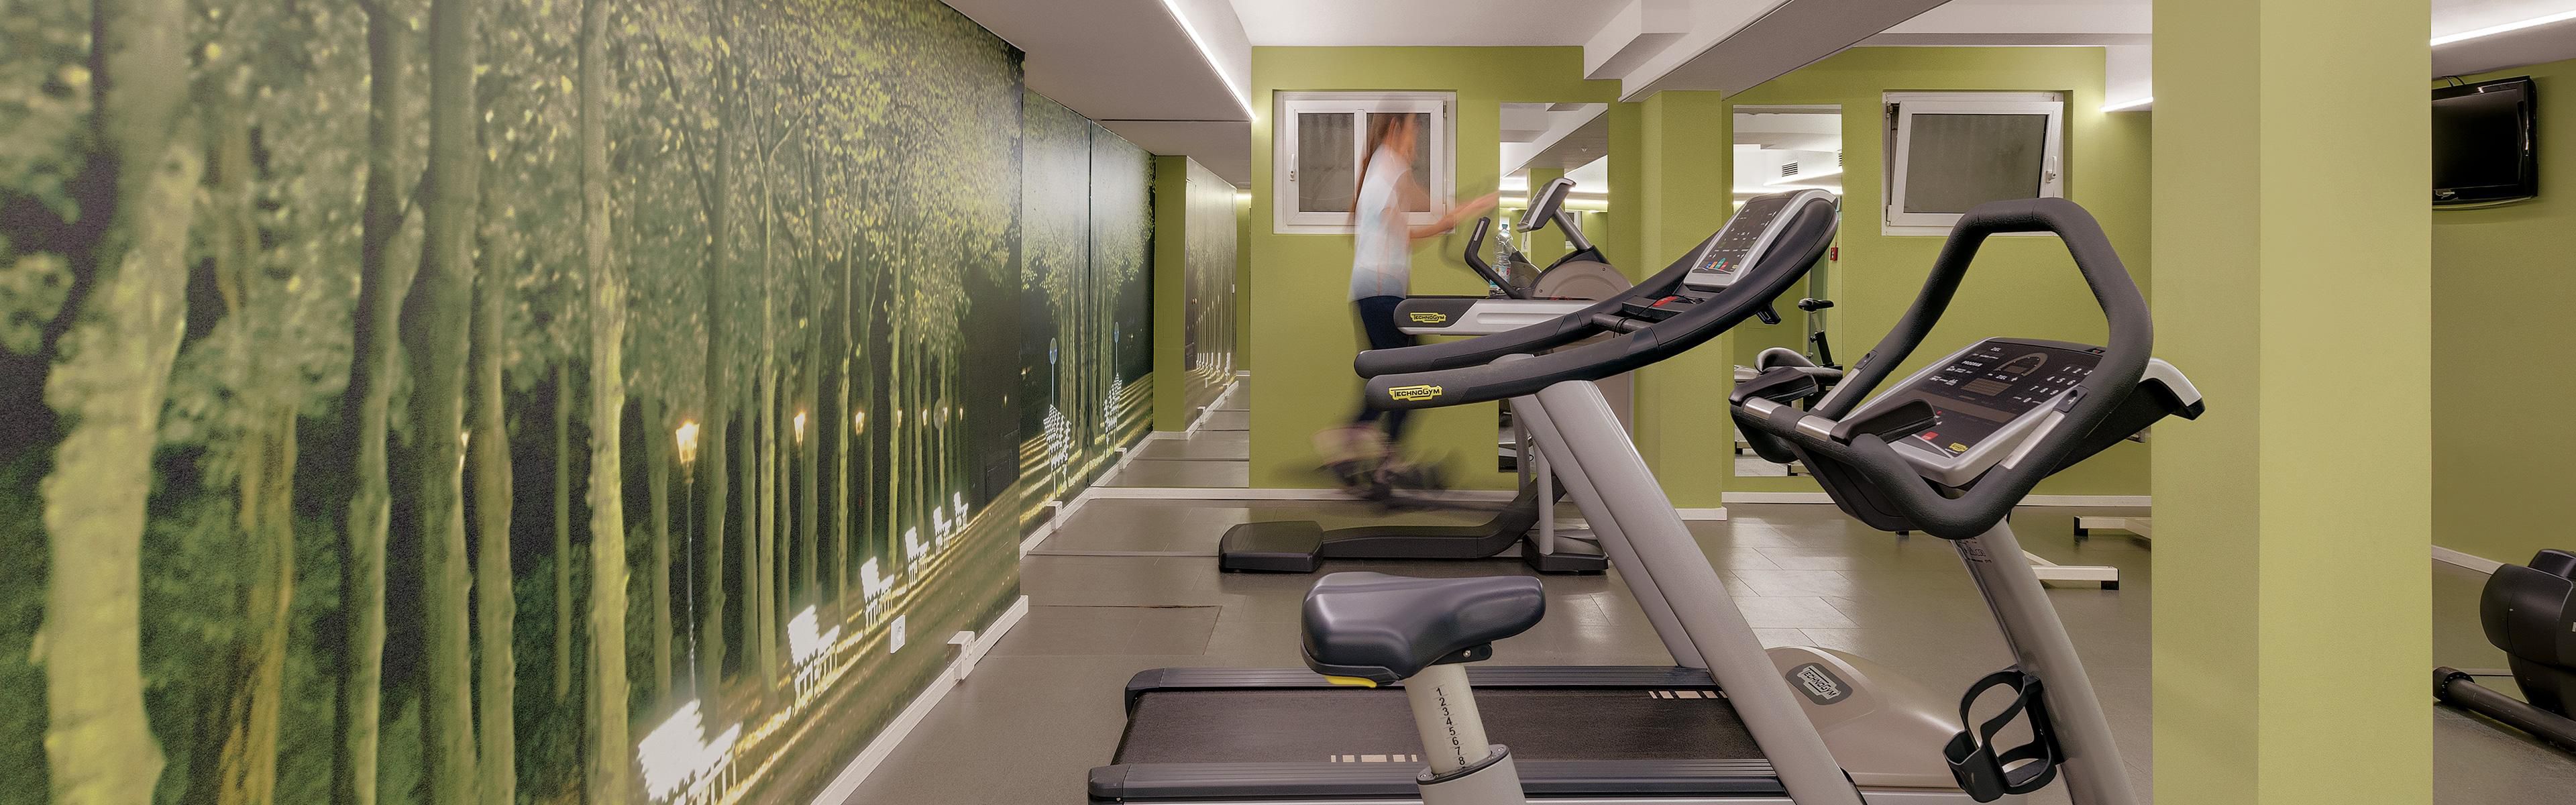 Continue your workout regimen in our 24 hour fitness center.